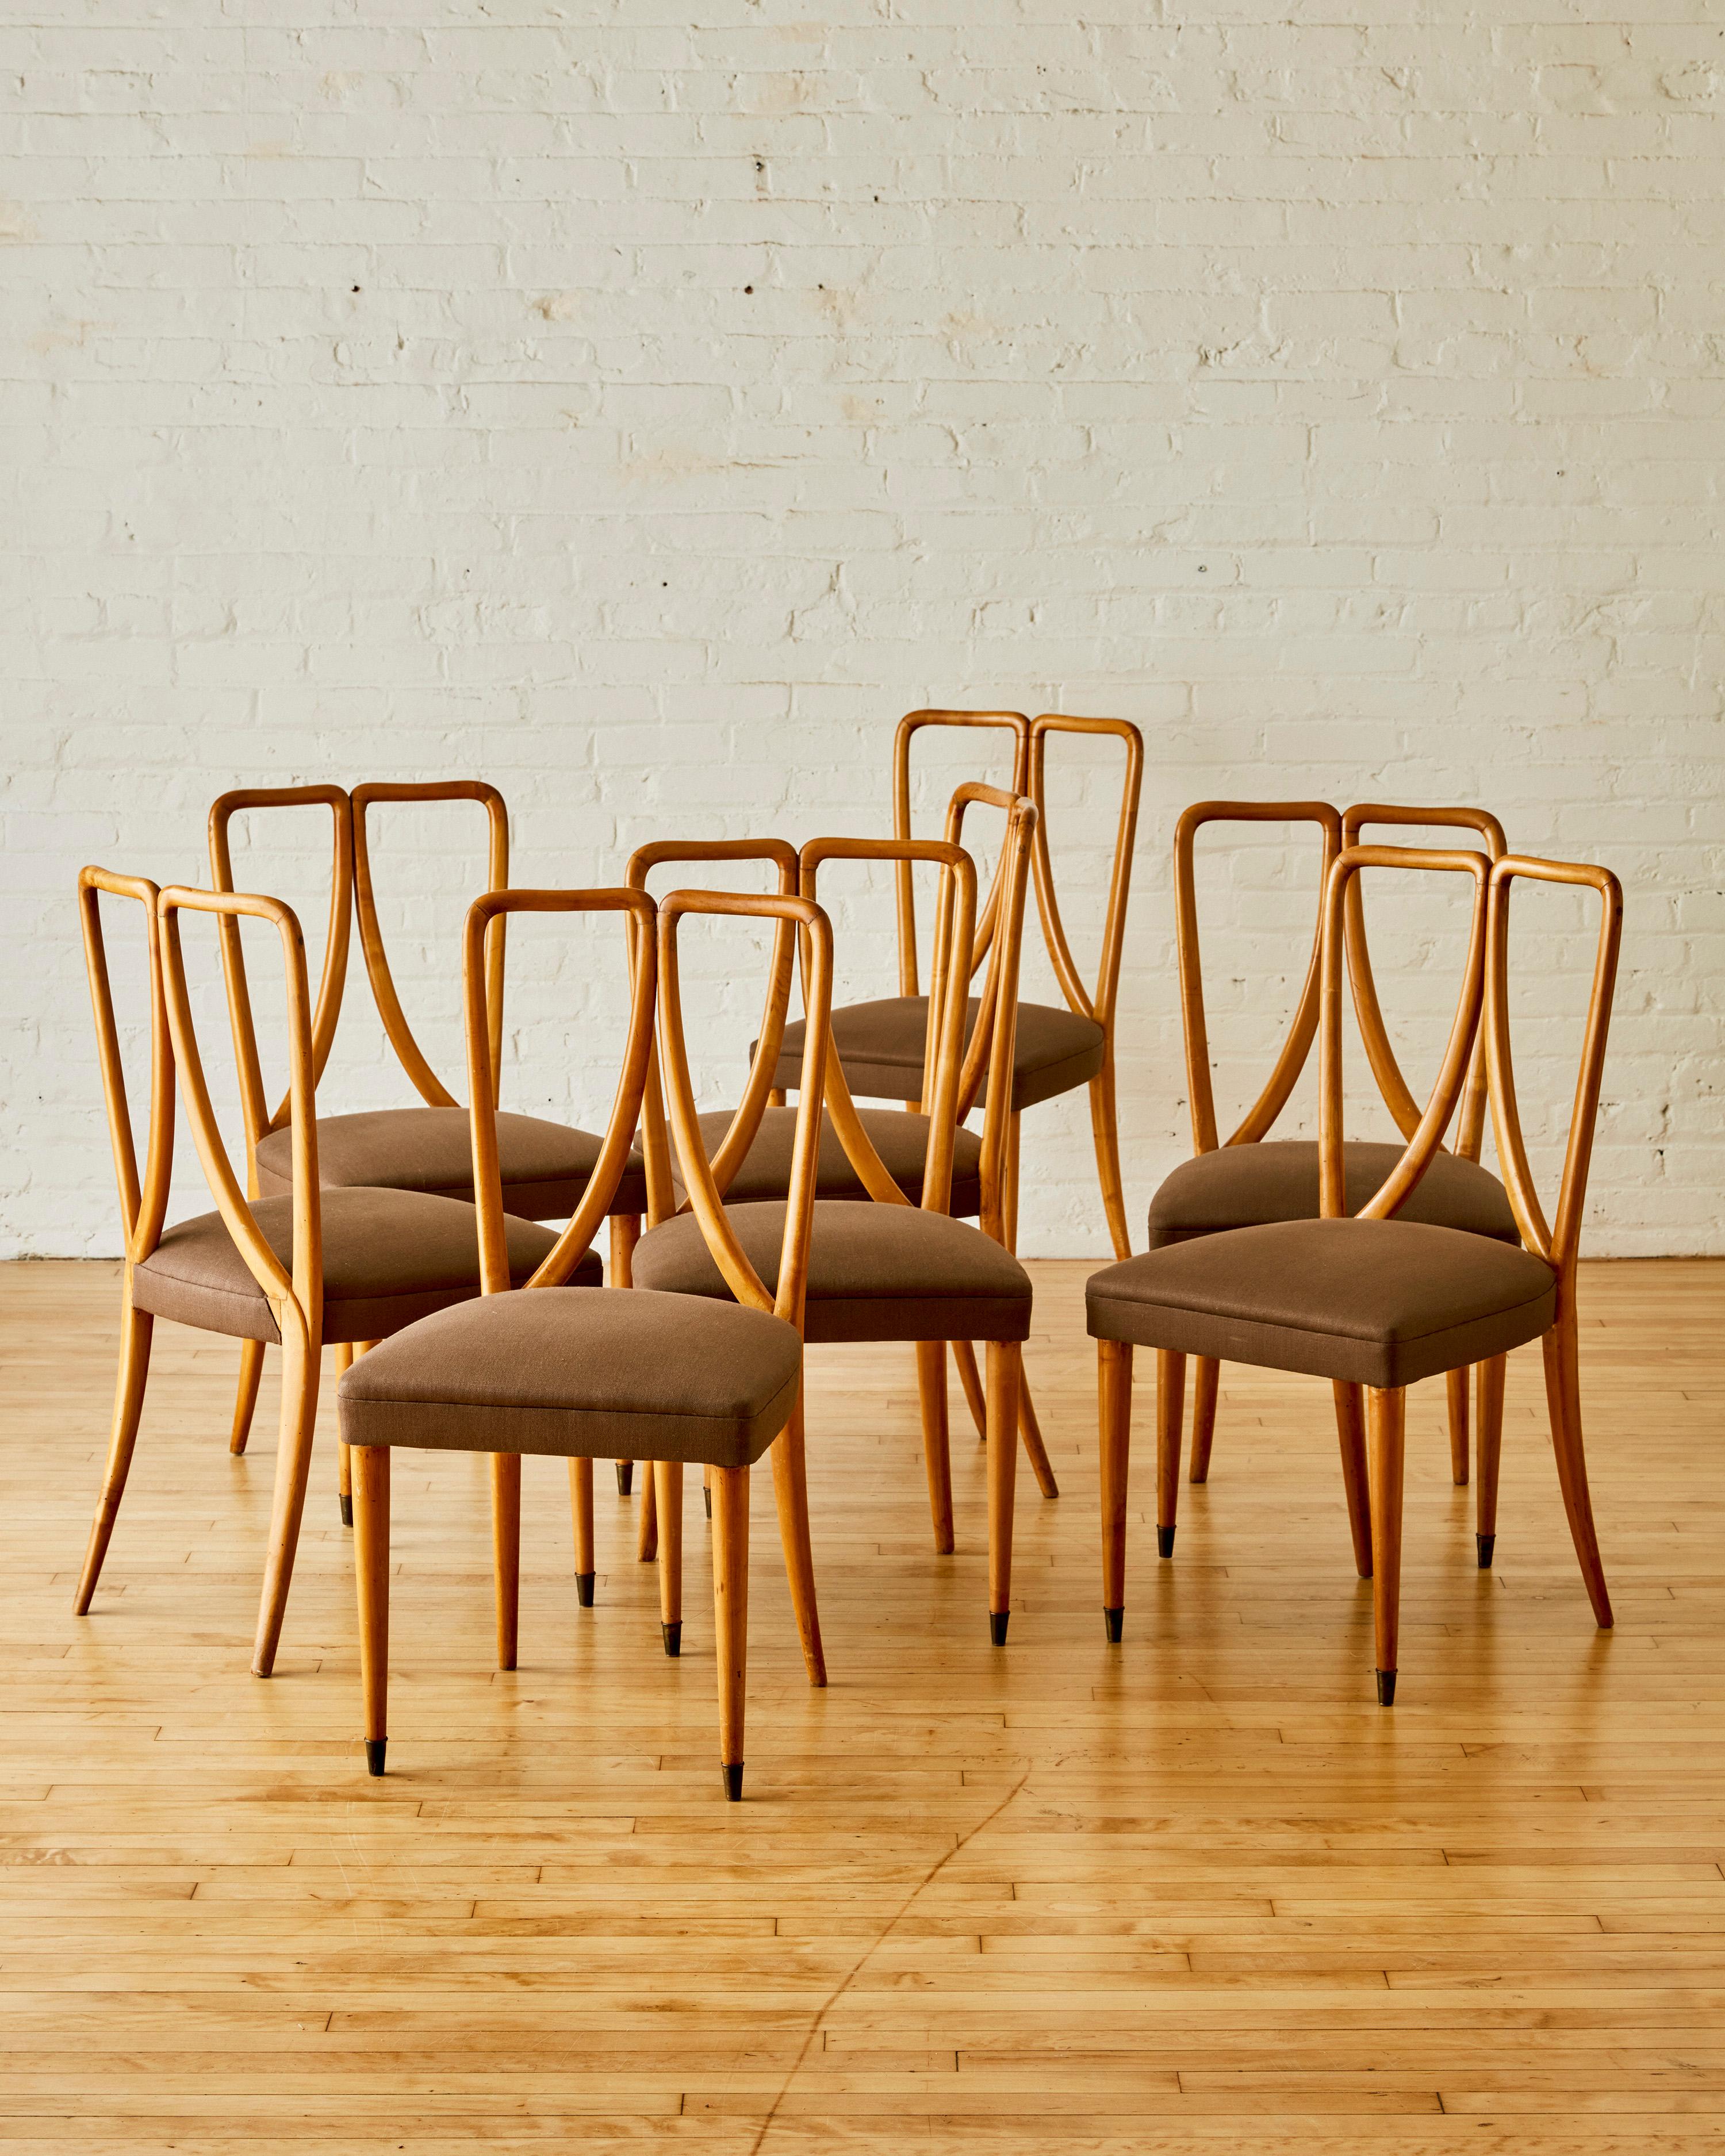 A set of 8 fruitwood dining chairs by Guglielmo Ulrich with an irregular open backrest, Newly reupholstered in Linen

Guglielmo Ulrich (born 1904, Milan–died 1977) was an Italian architect, furniture designer, and painter. He was born to a notable